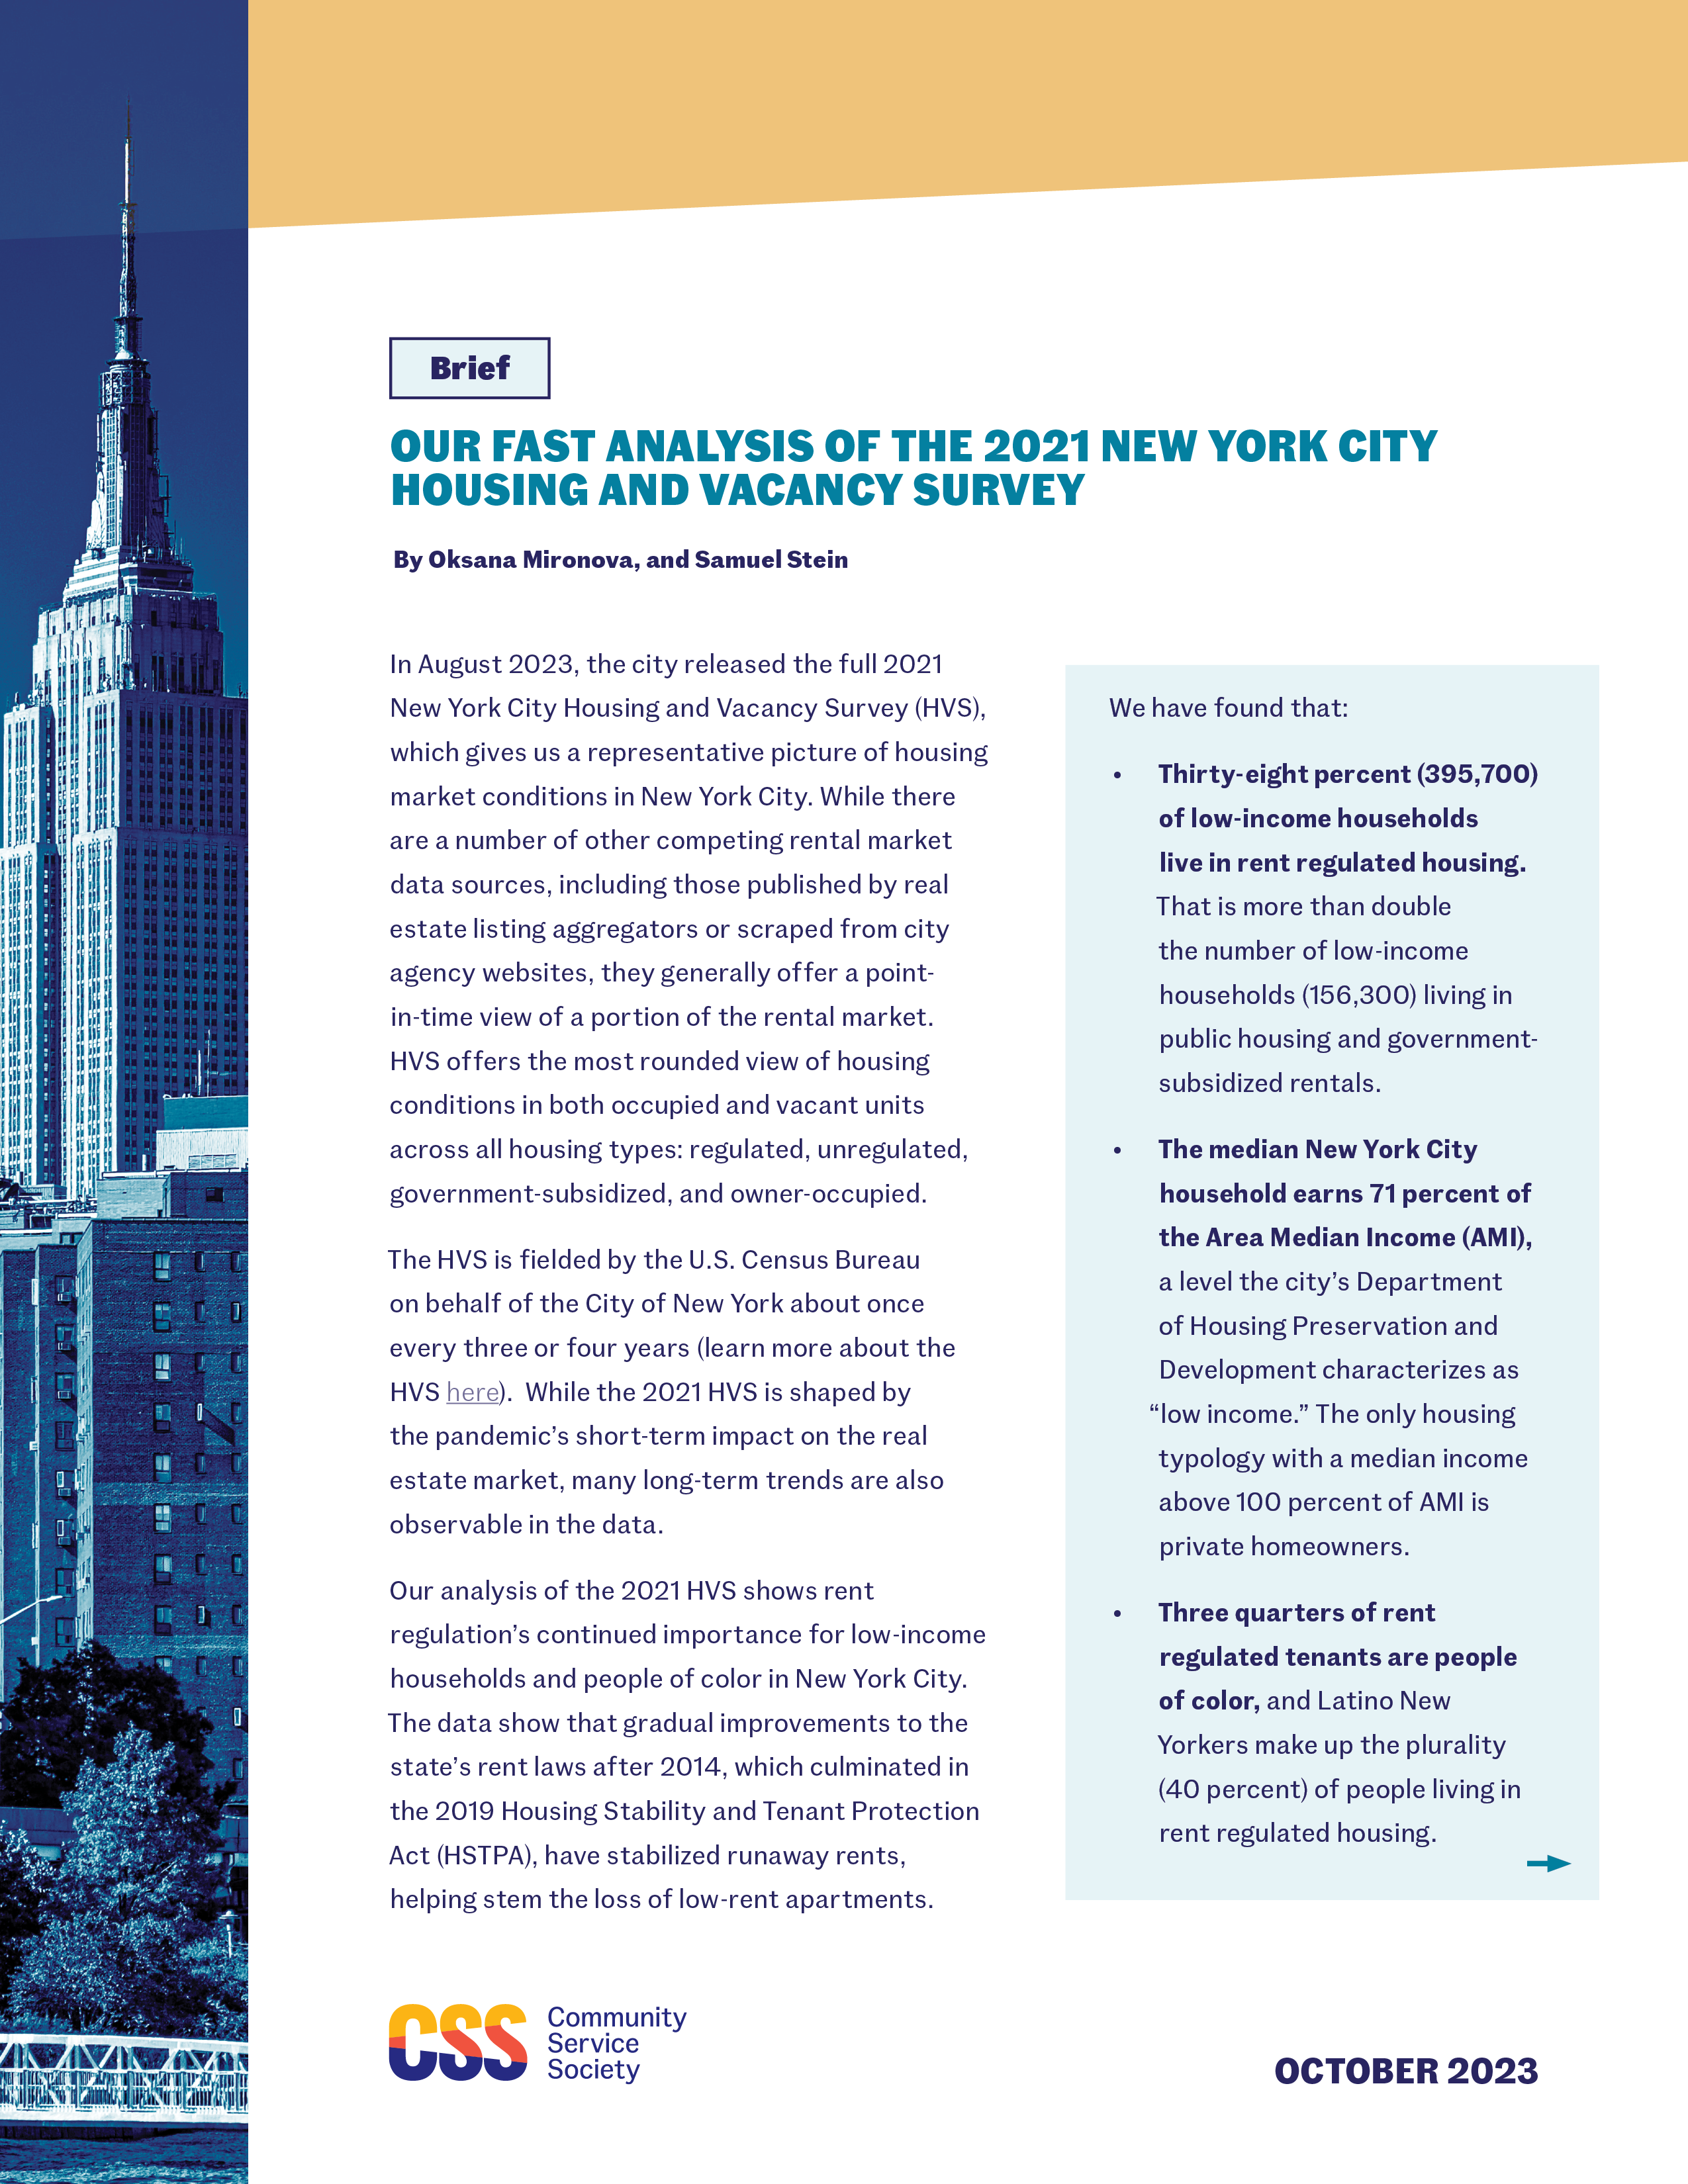 Our Fast Analysis of the 2021 New York City Housing and Vacancy